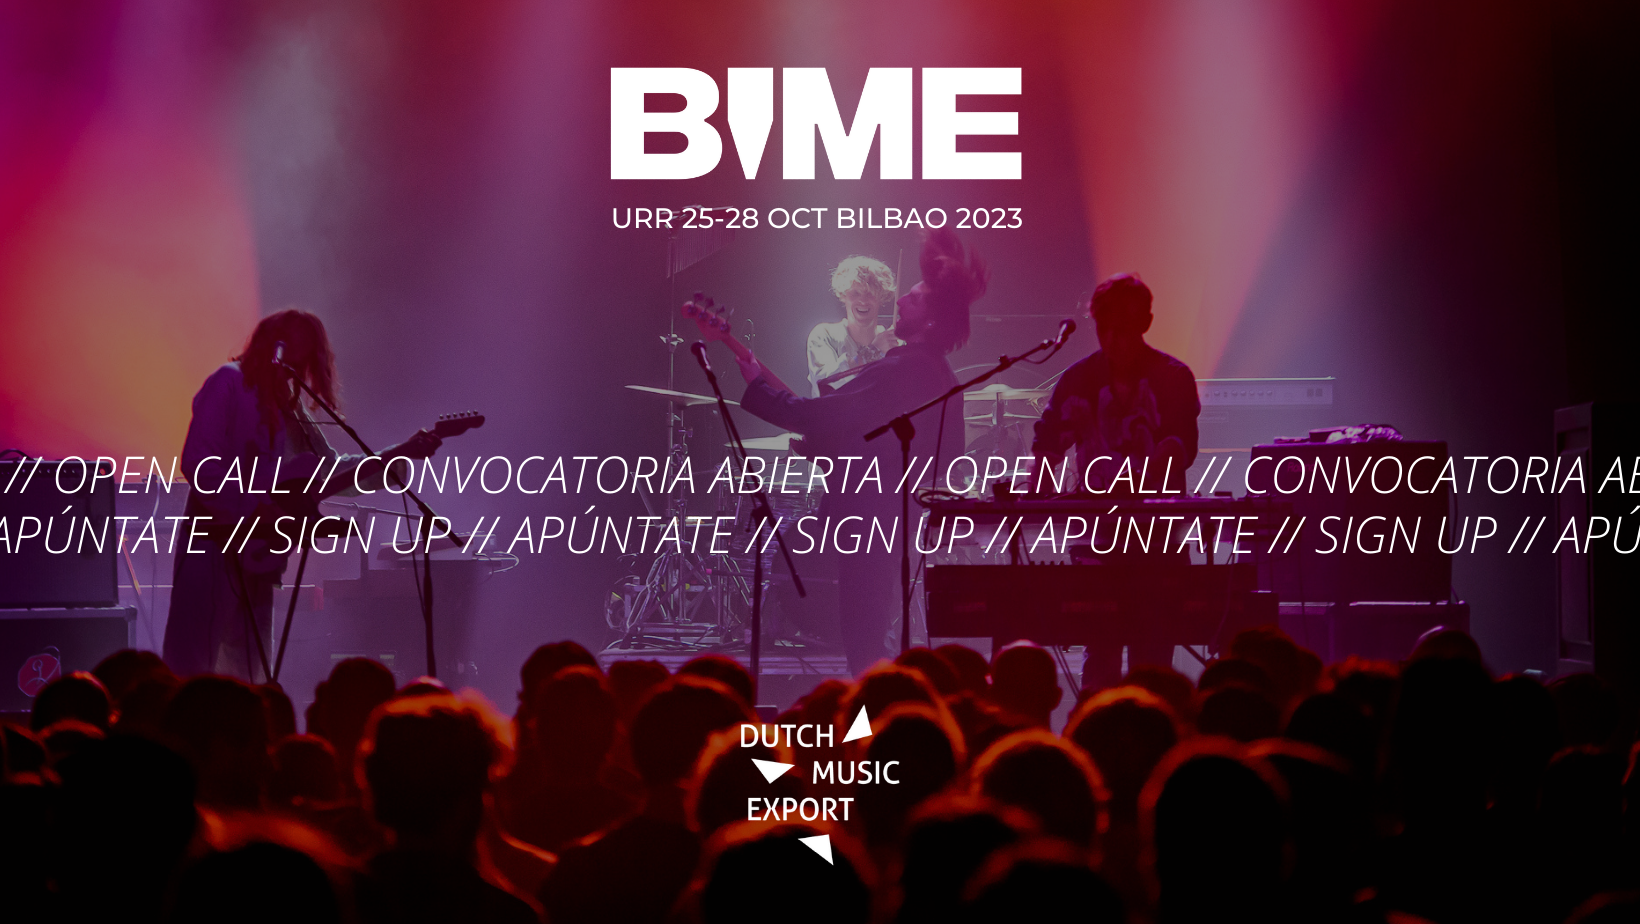 [CLOSED] Nederlanden! The call for BIME Bilbao 2023 is now open!